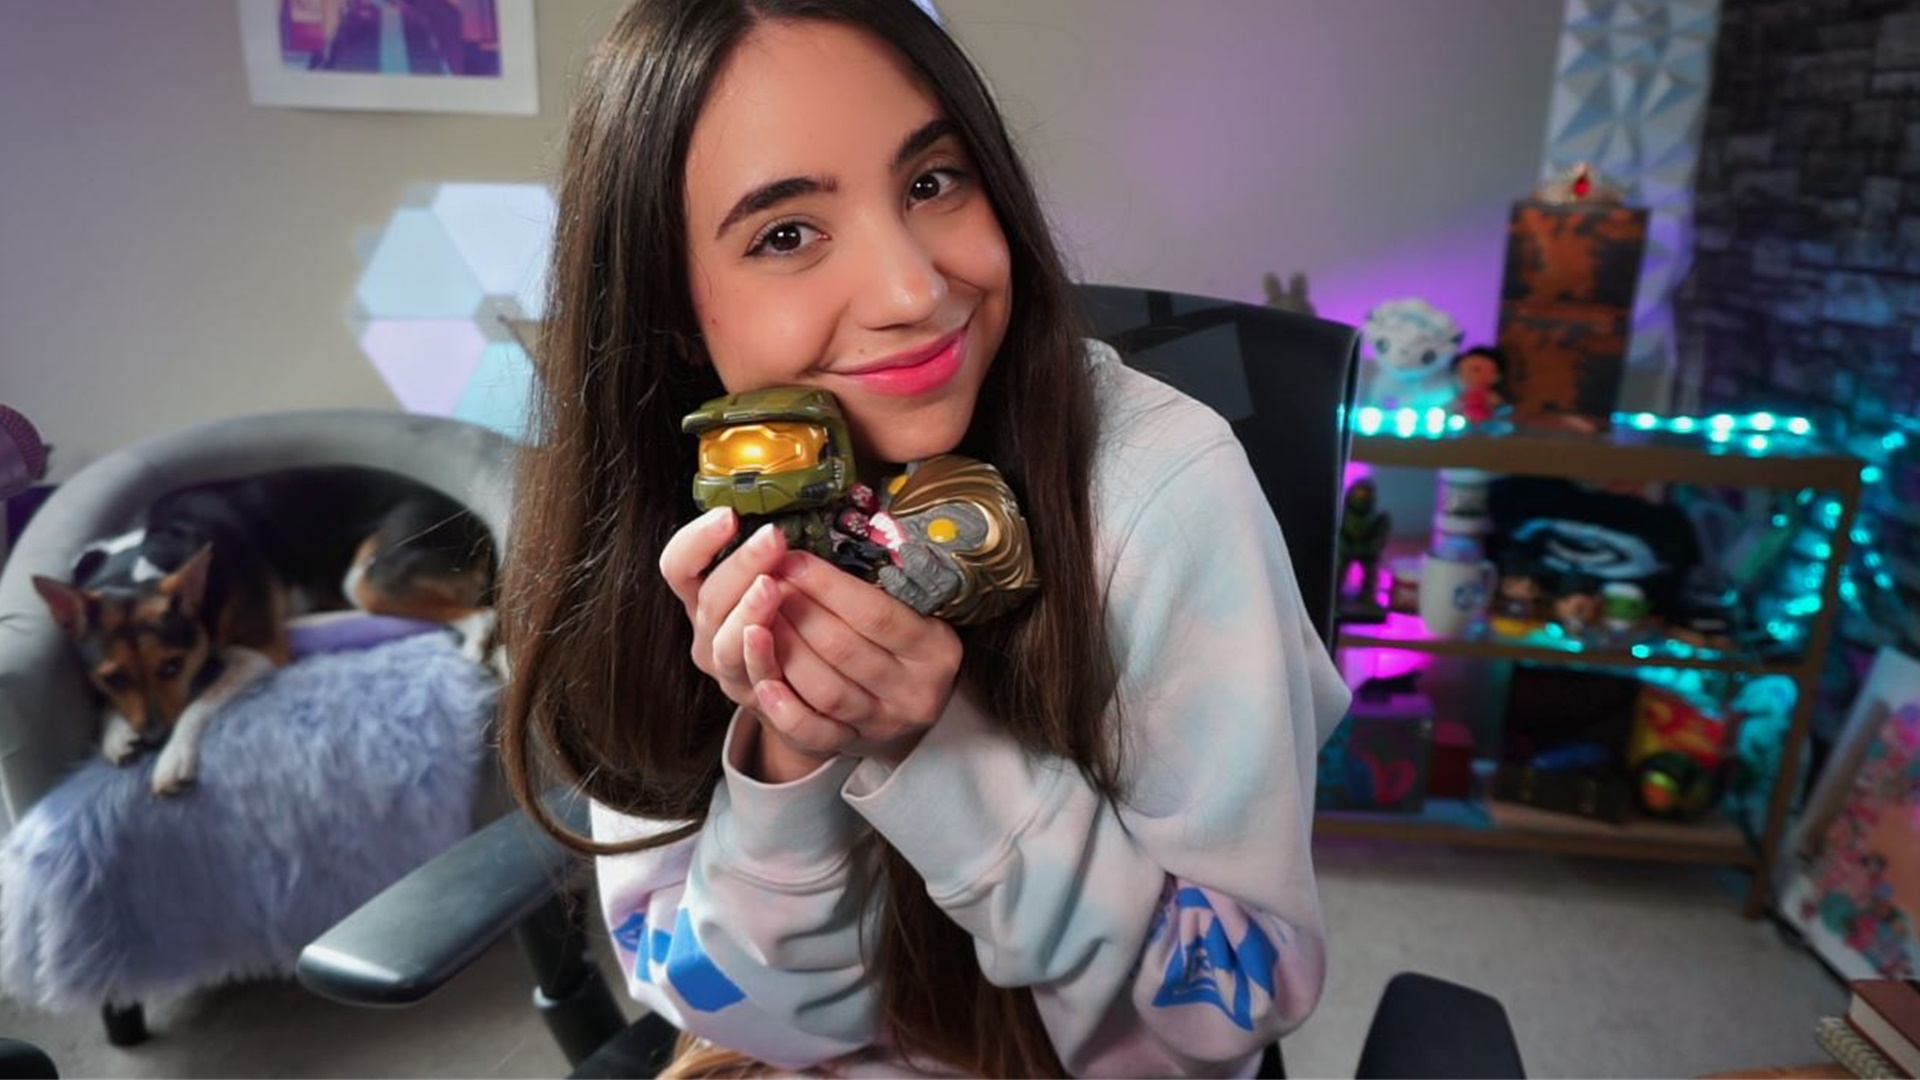 Photograph of Alyek in her room holding Funko figures of the Master Chief and the Arbiter